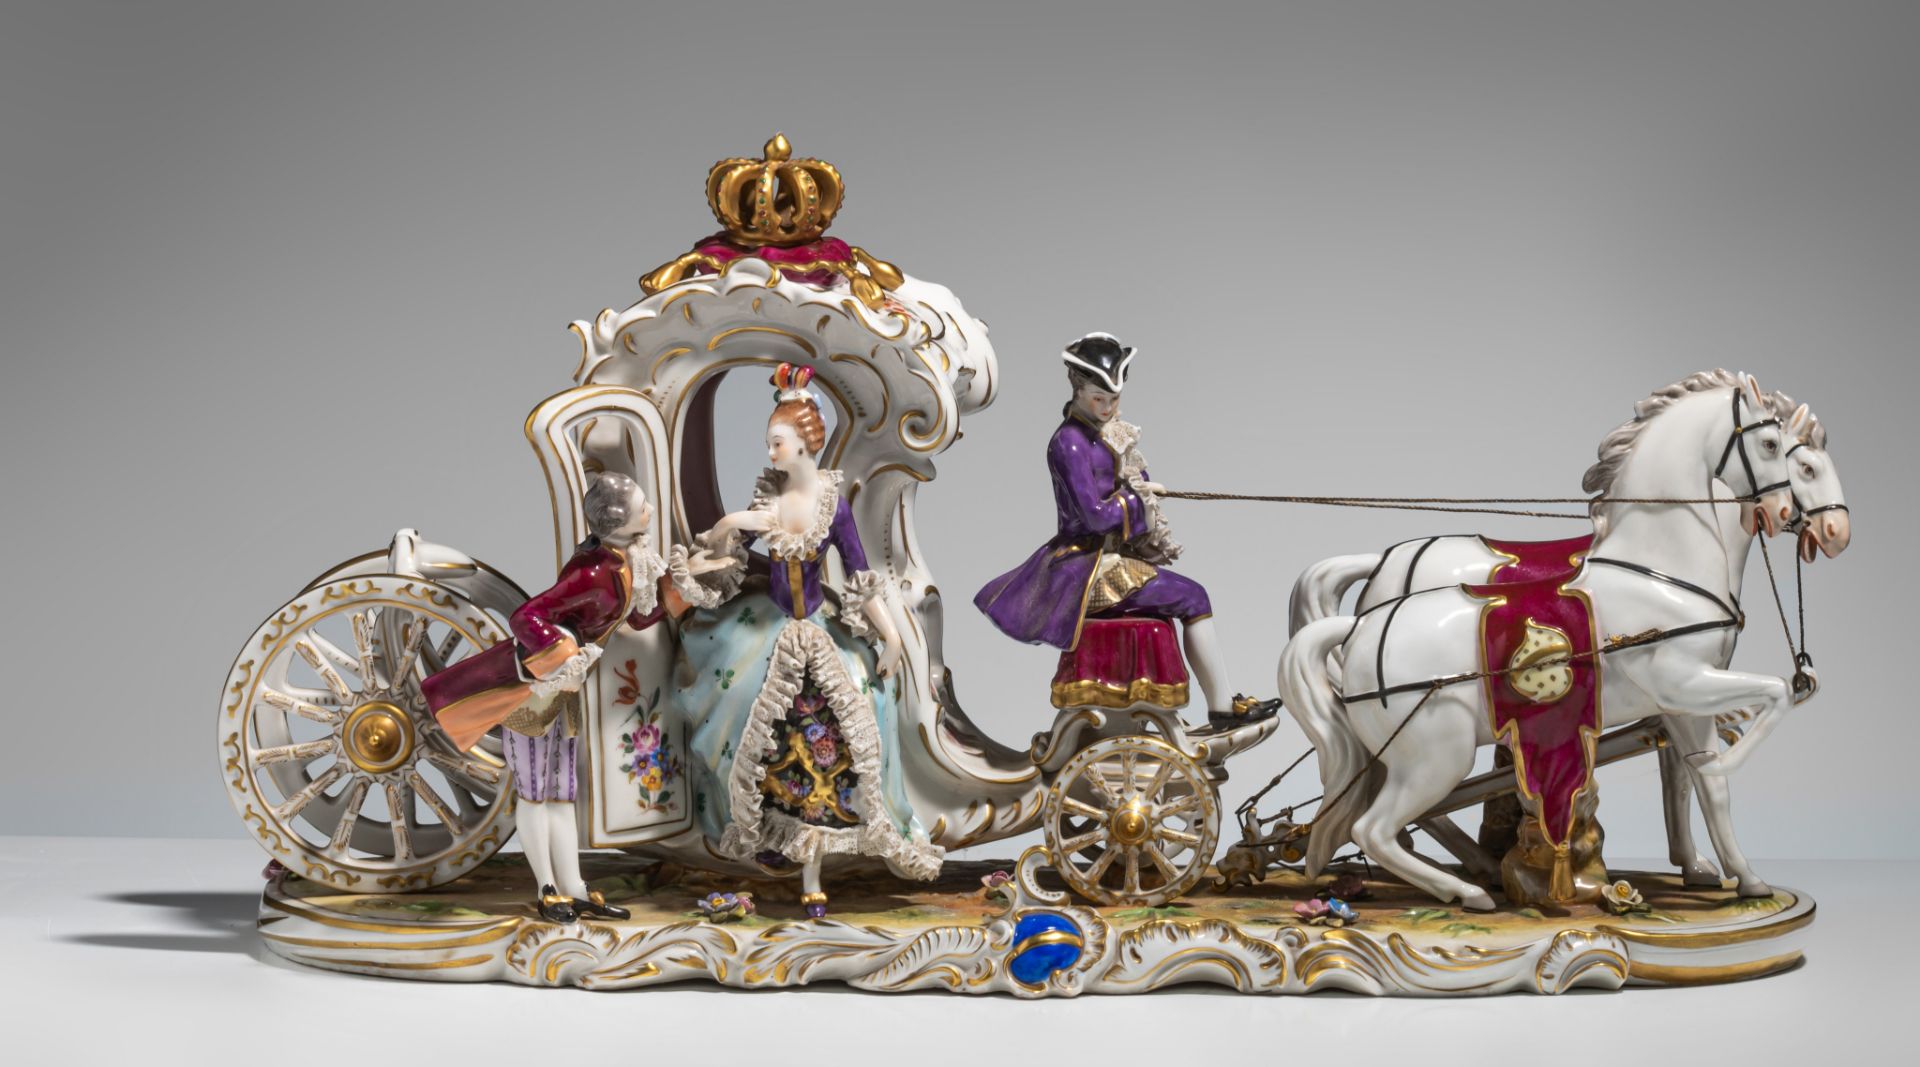 A Saxony porcelain group of a chariot in abundant Rococo style, H 29 - W 57 cm - Image 2 of 9